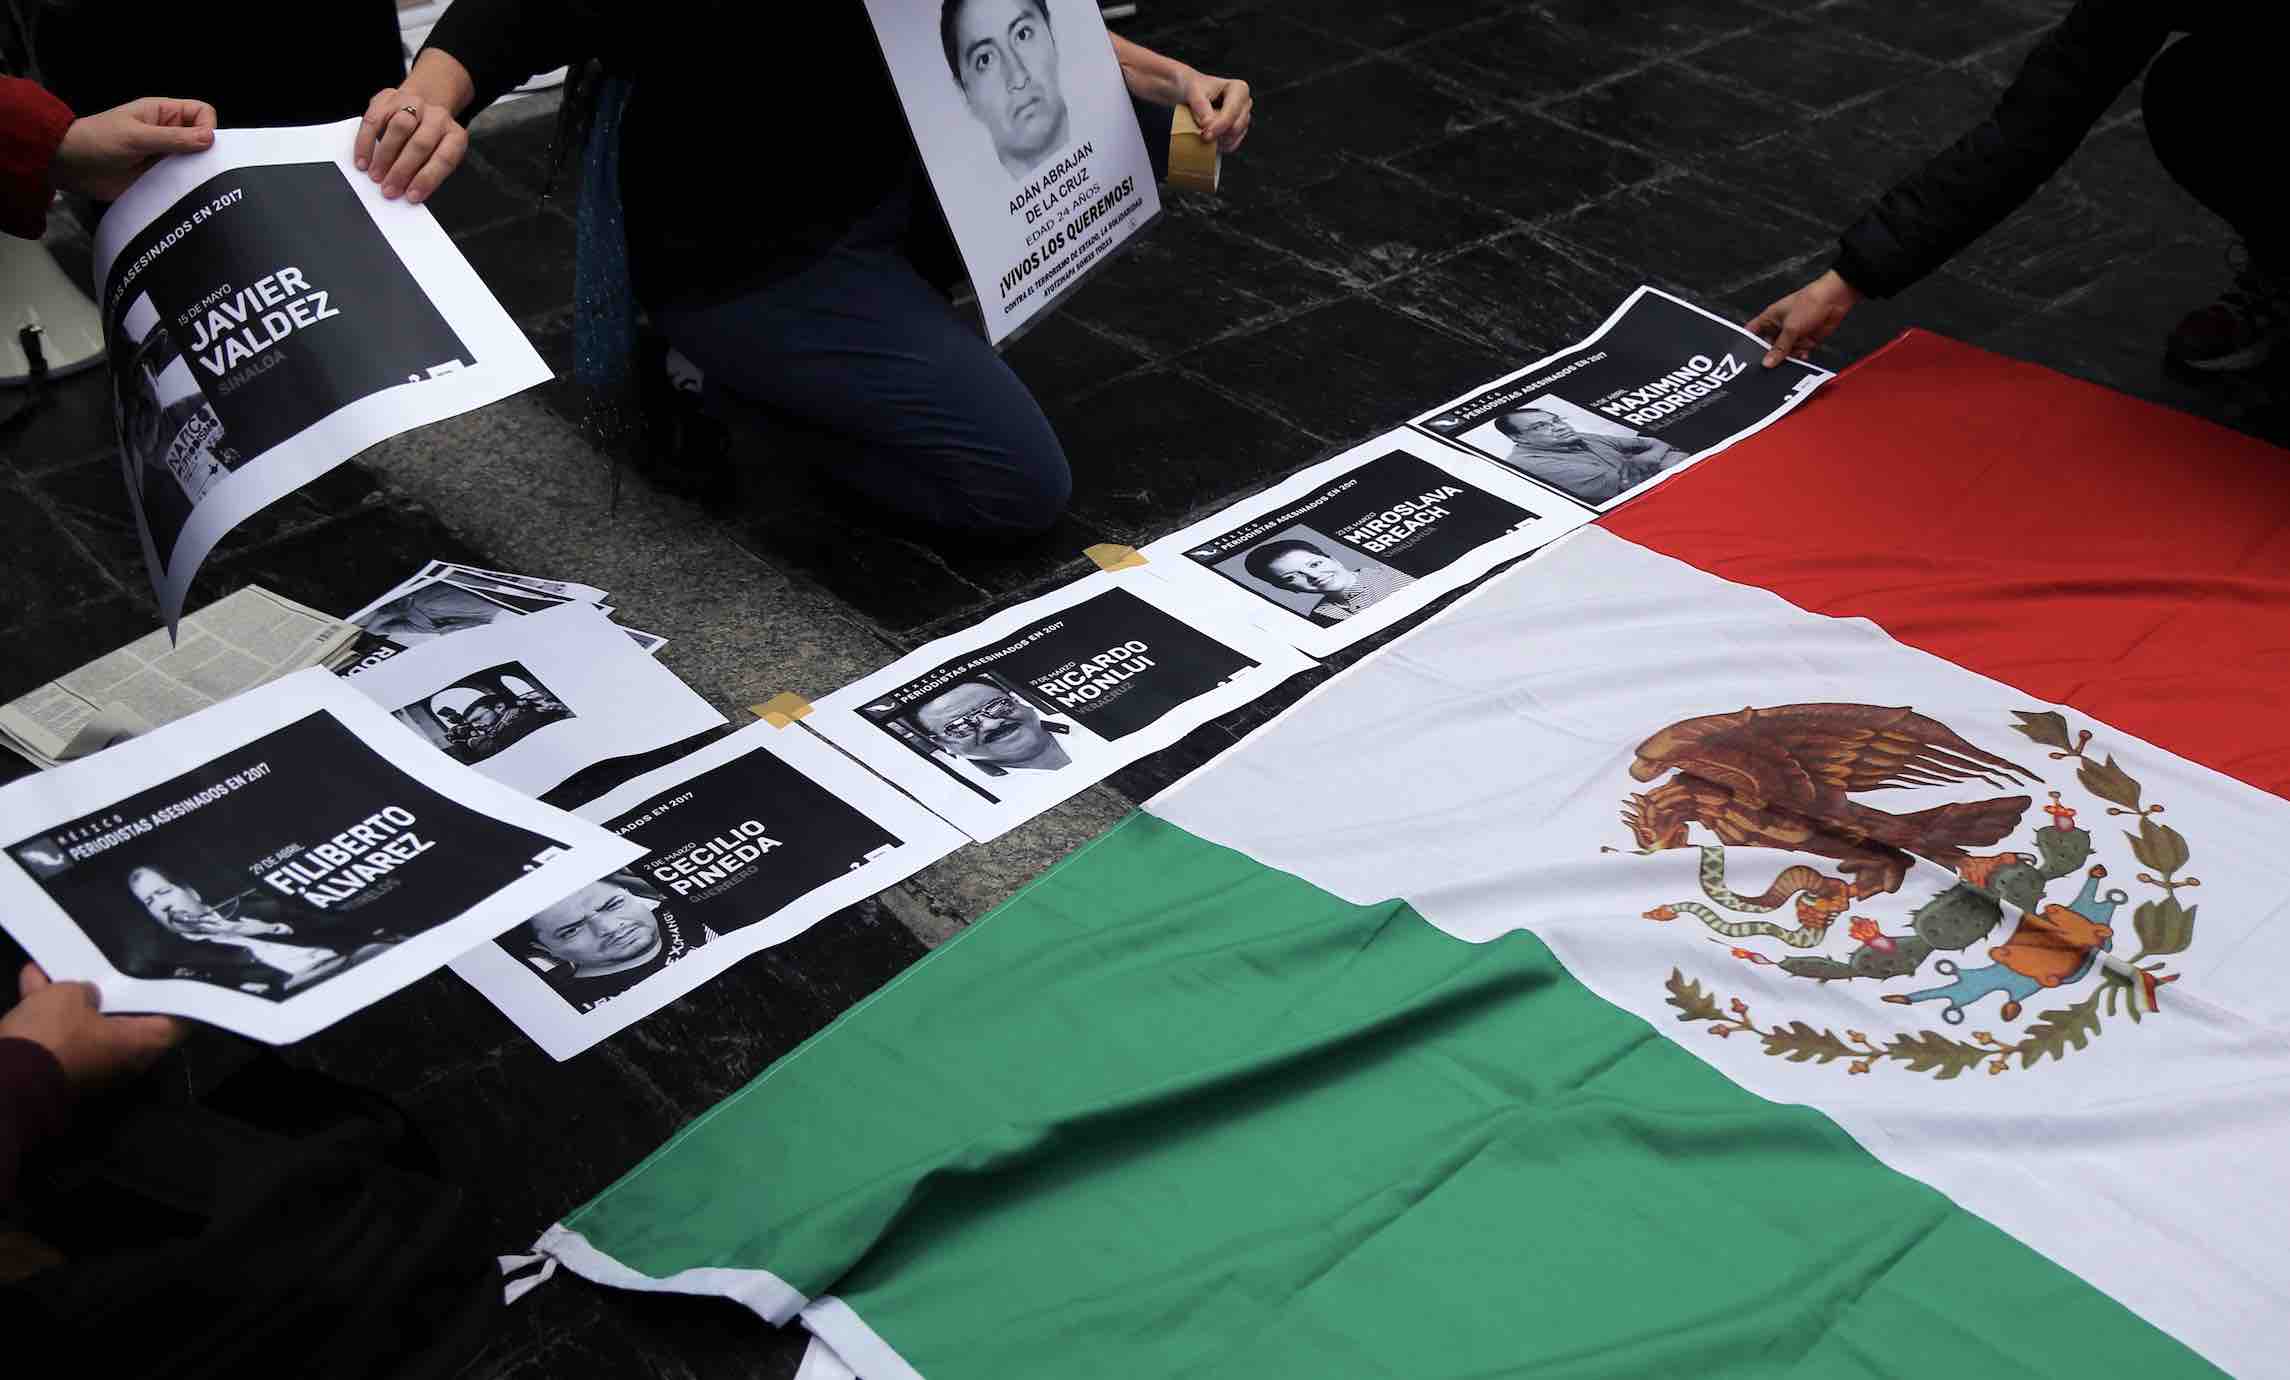 People place photos of murdered journalists next to the national Mexican flag in Buenos Aires. Reuters/Marcos Brindicci